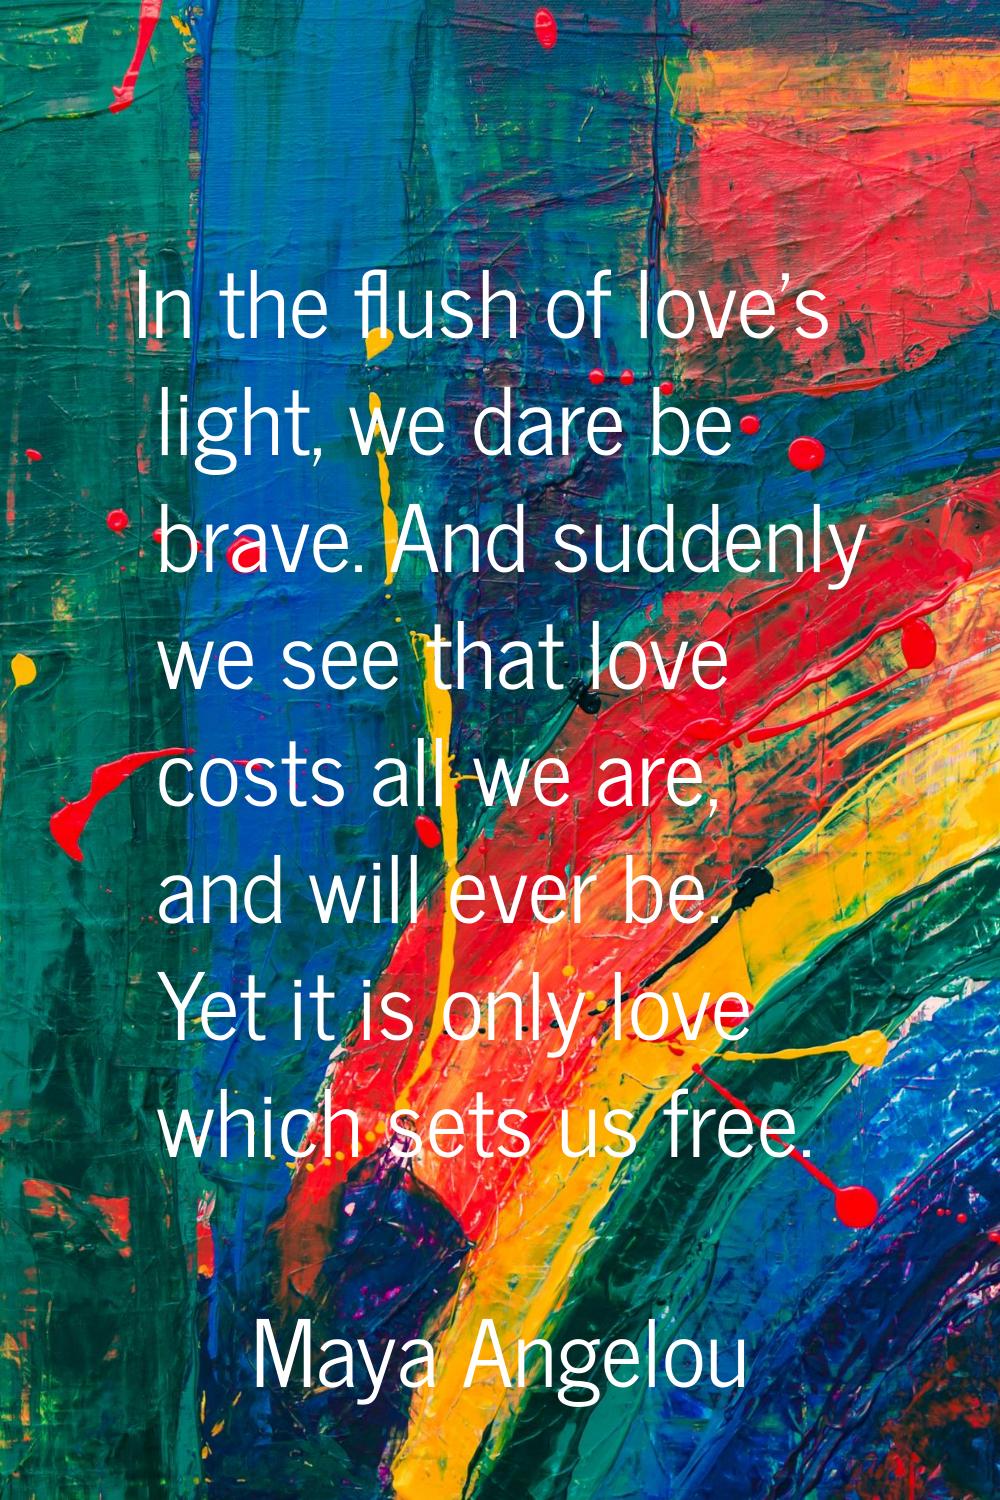 In the flush of love's light, we dare be brave. And suddenly we see that love costs all we are, and